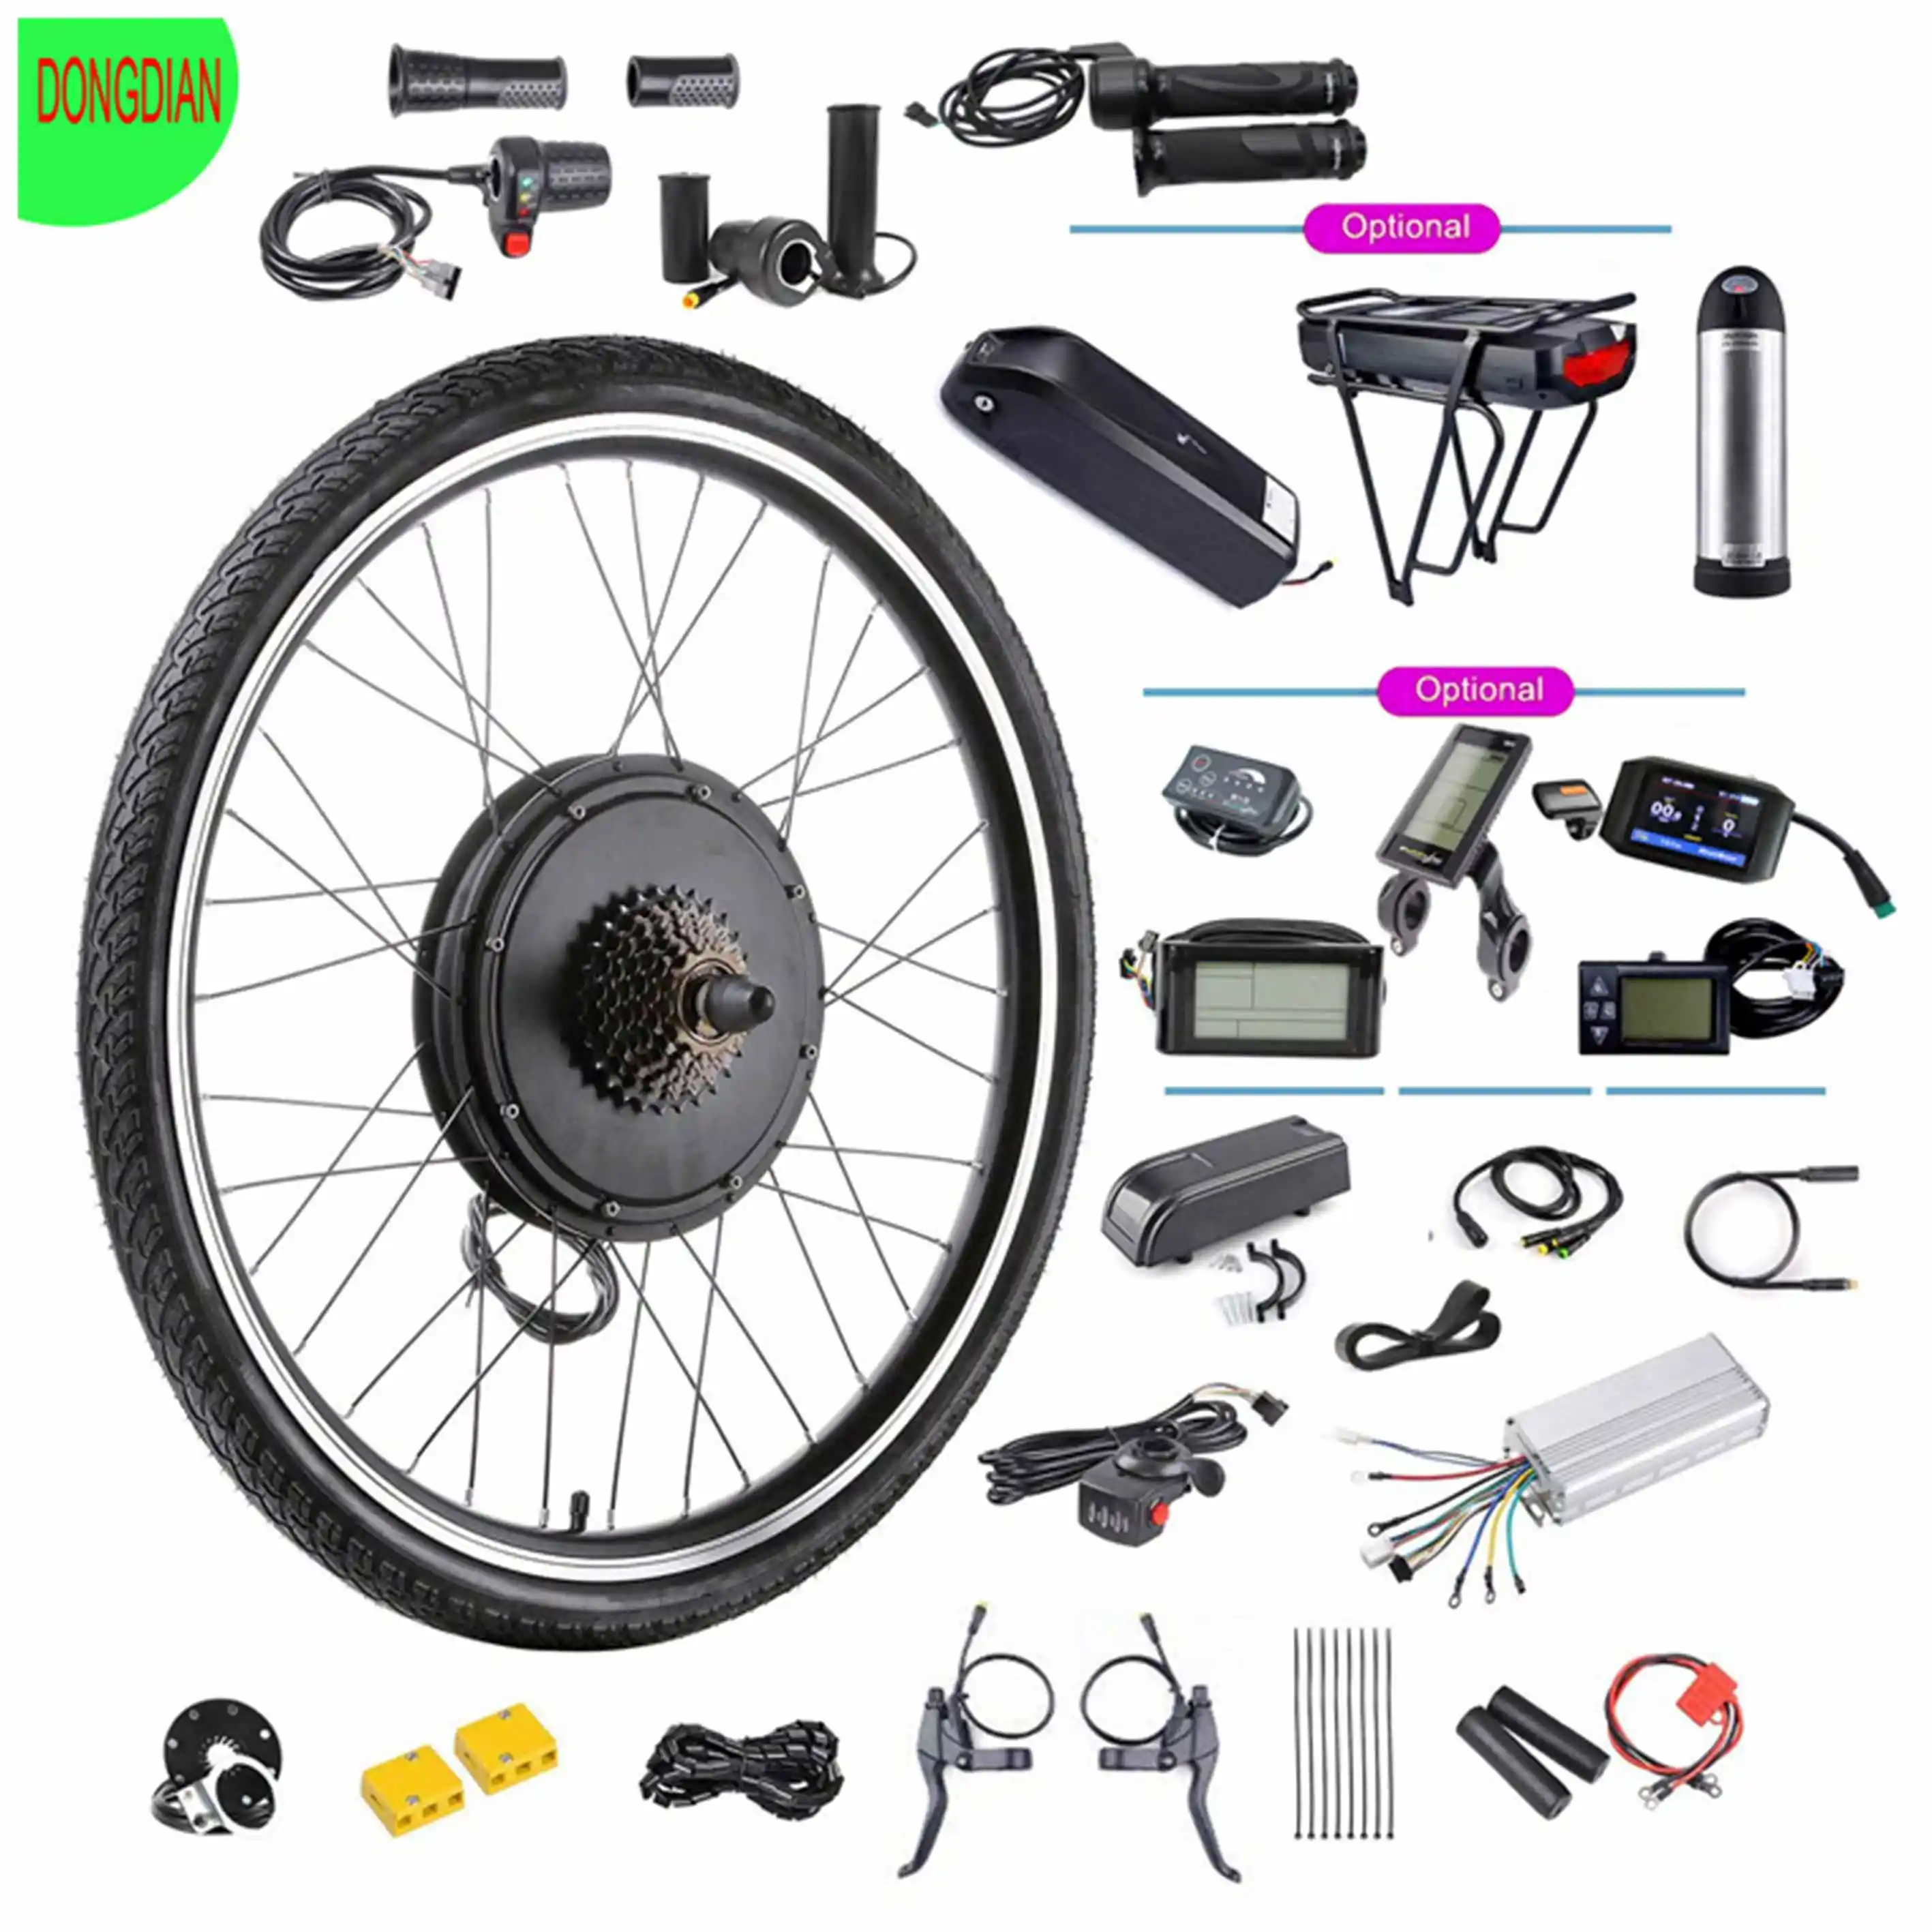 

48V Lithium Battery Ebike Conversion Kit 1000W/1500W Electric Bike Kit Other+Electric+Bicycle+Parts